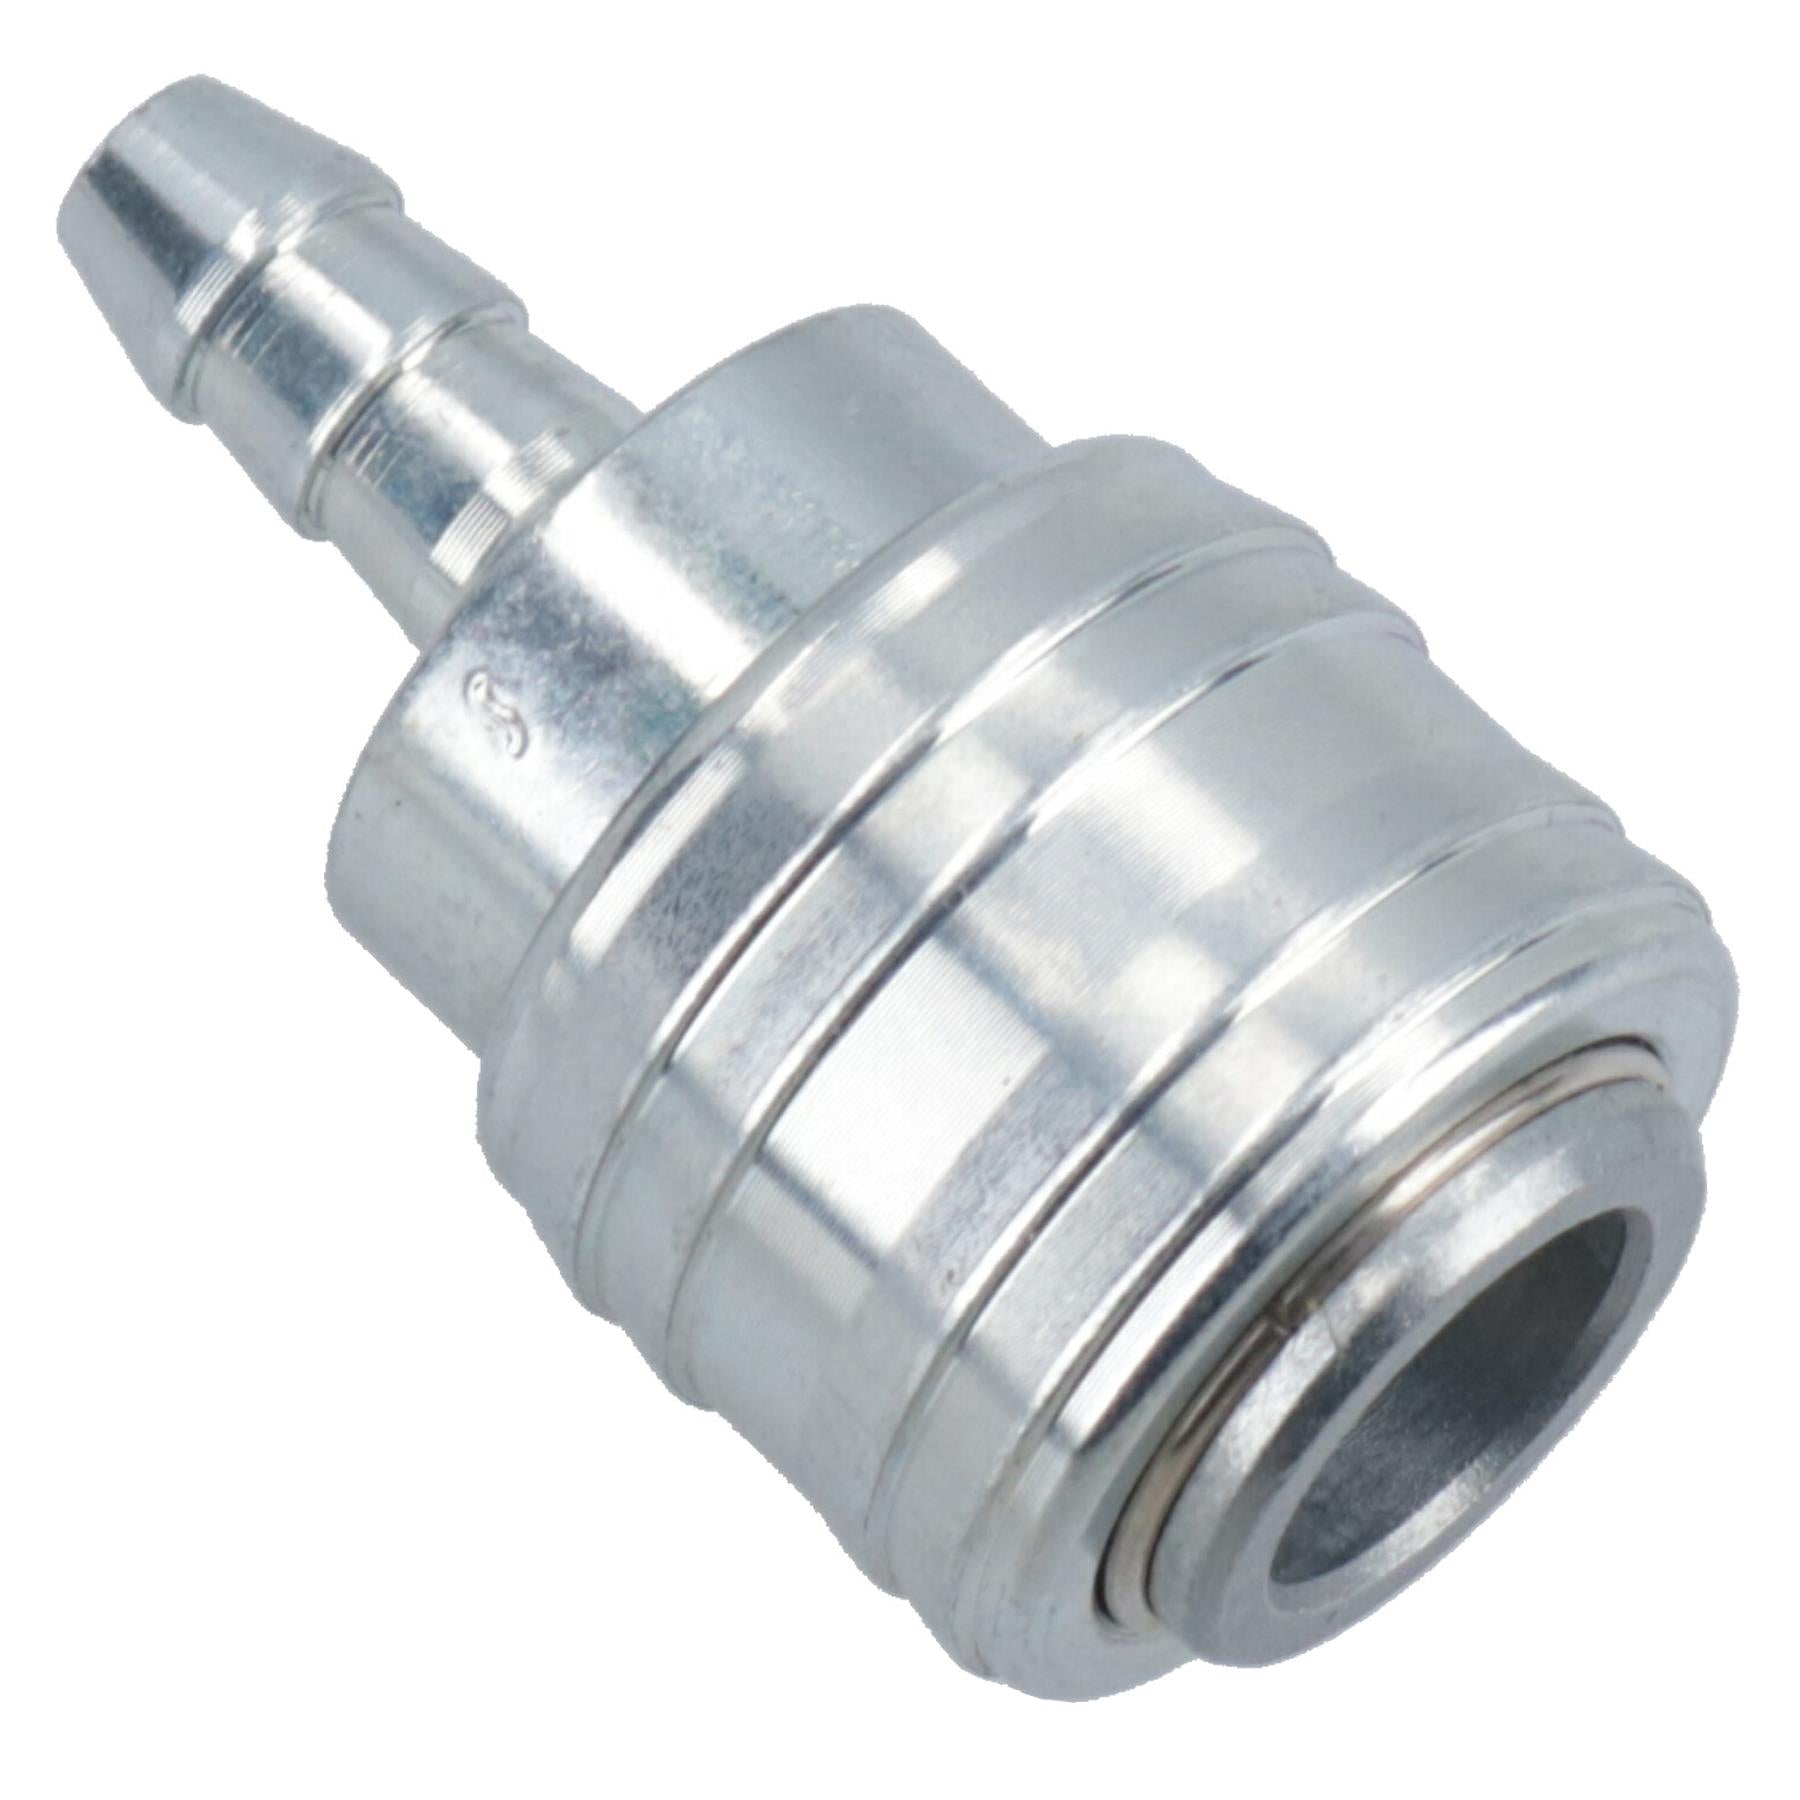 Euro Air Line Hose Quick Release Connector Coupler Barb with 8mm Hose Tail